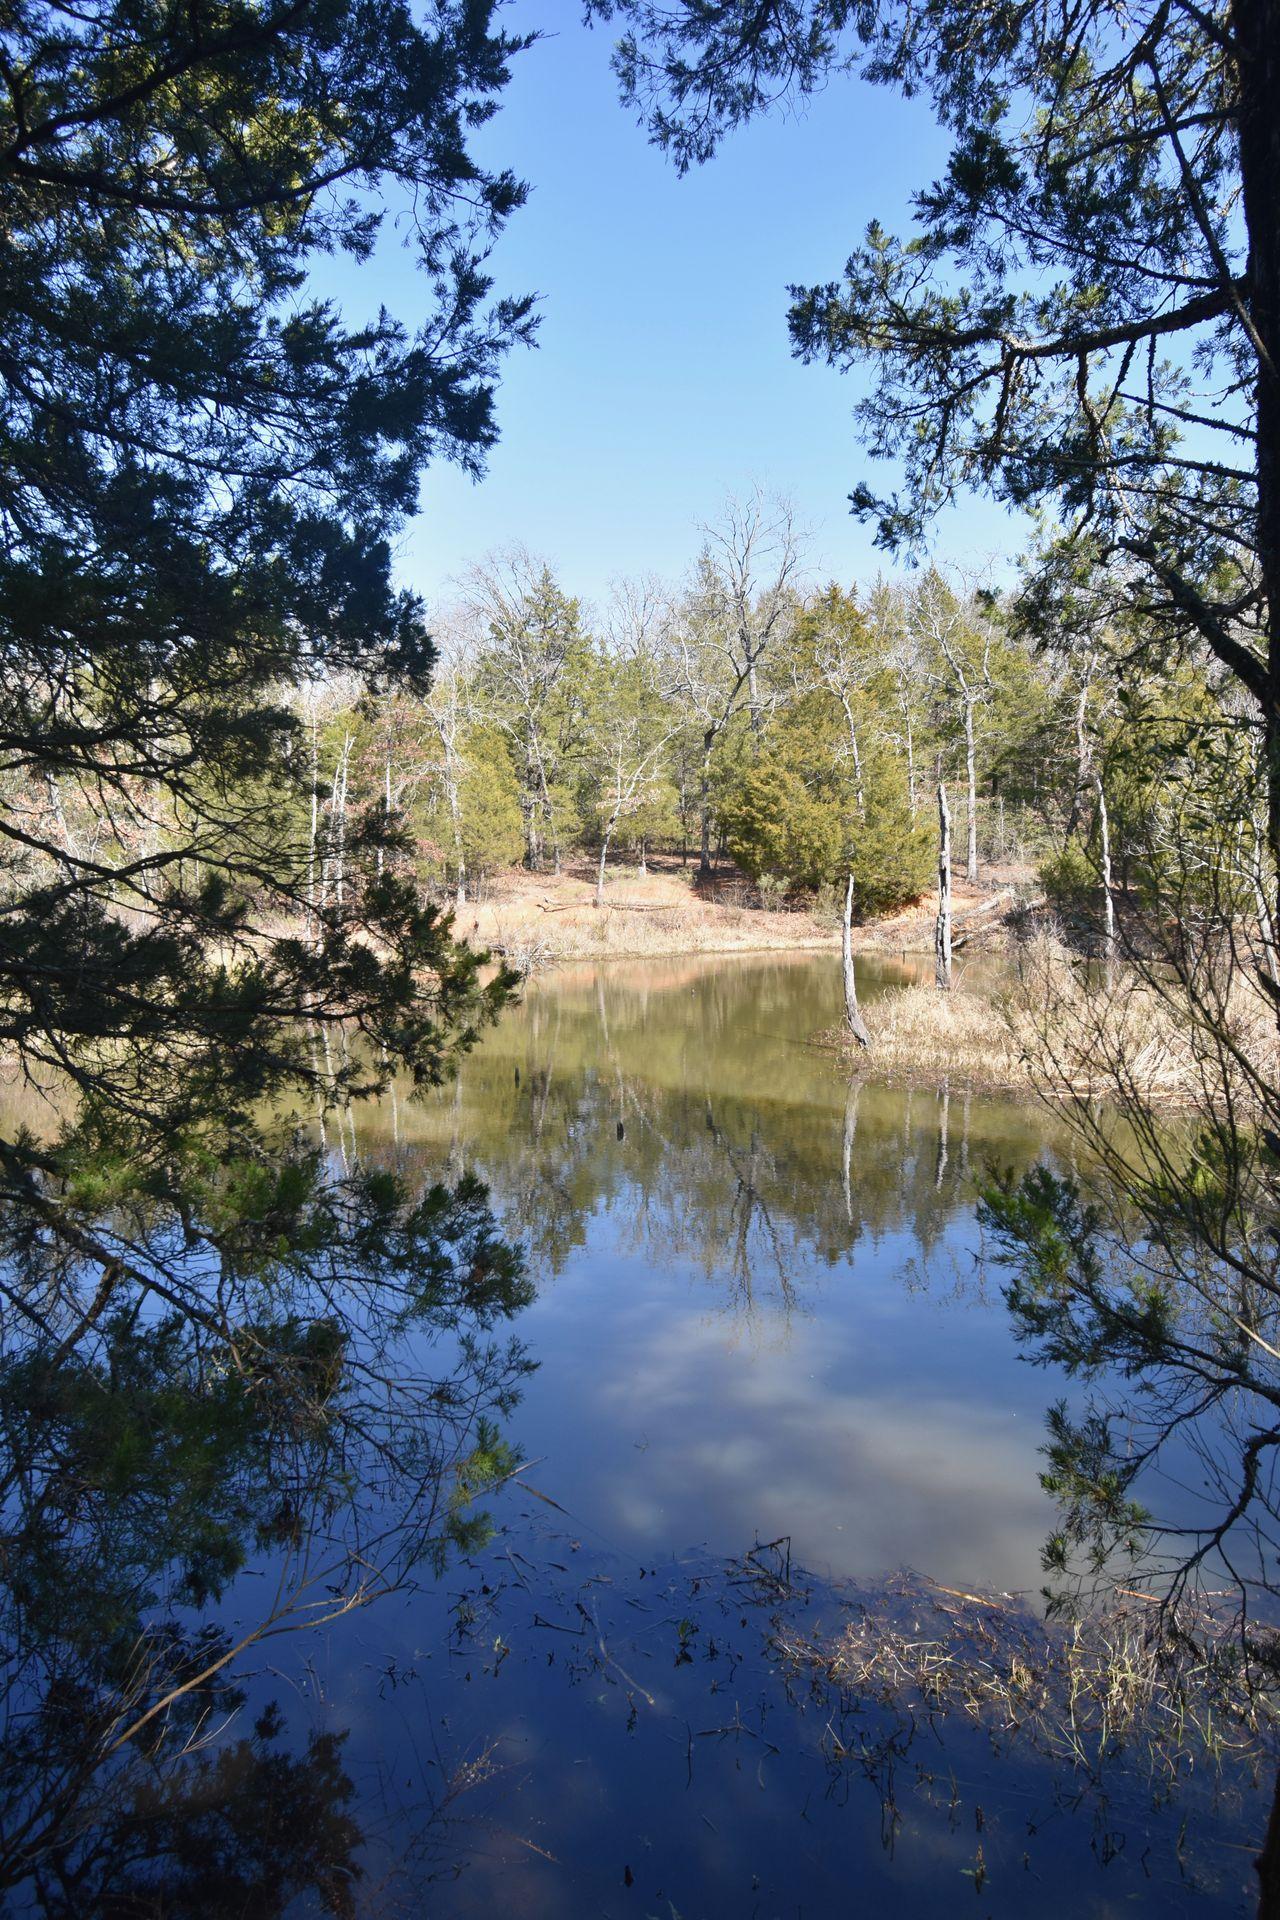 A view of Beaver Pond, a small pond in Purtis Creek State Park.